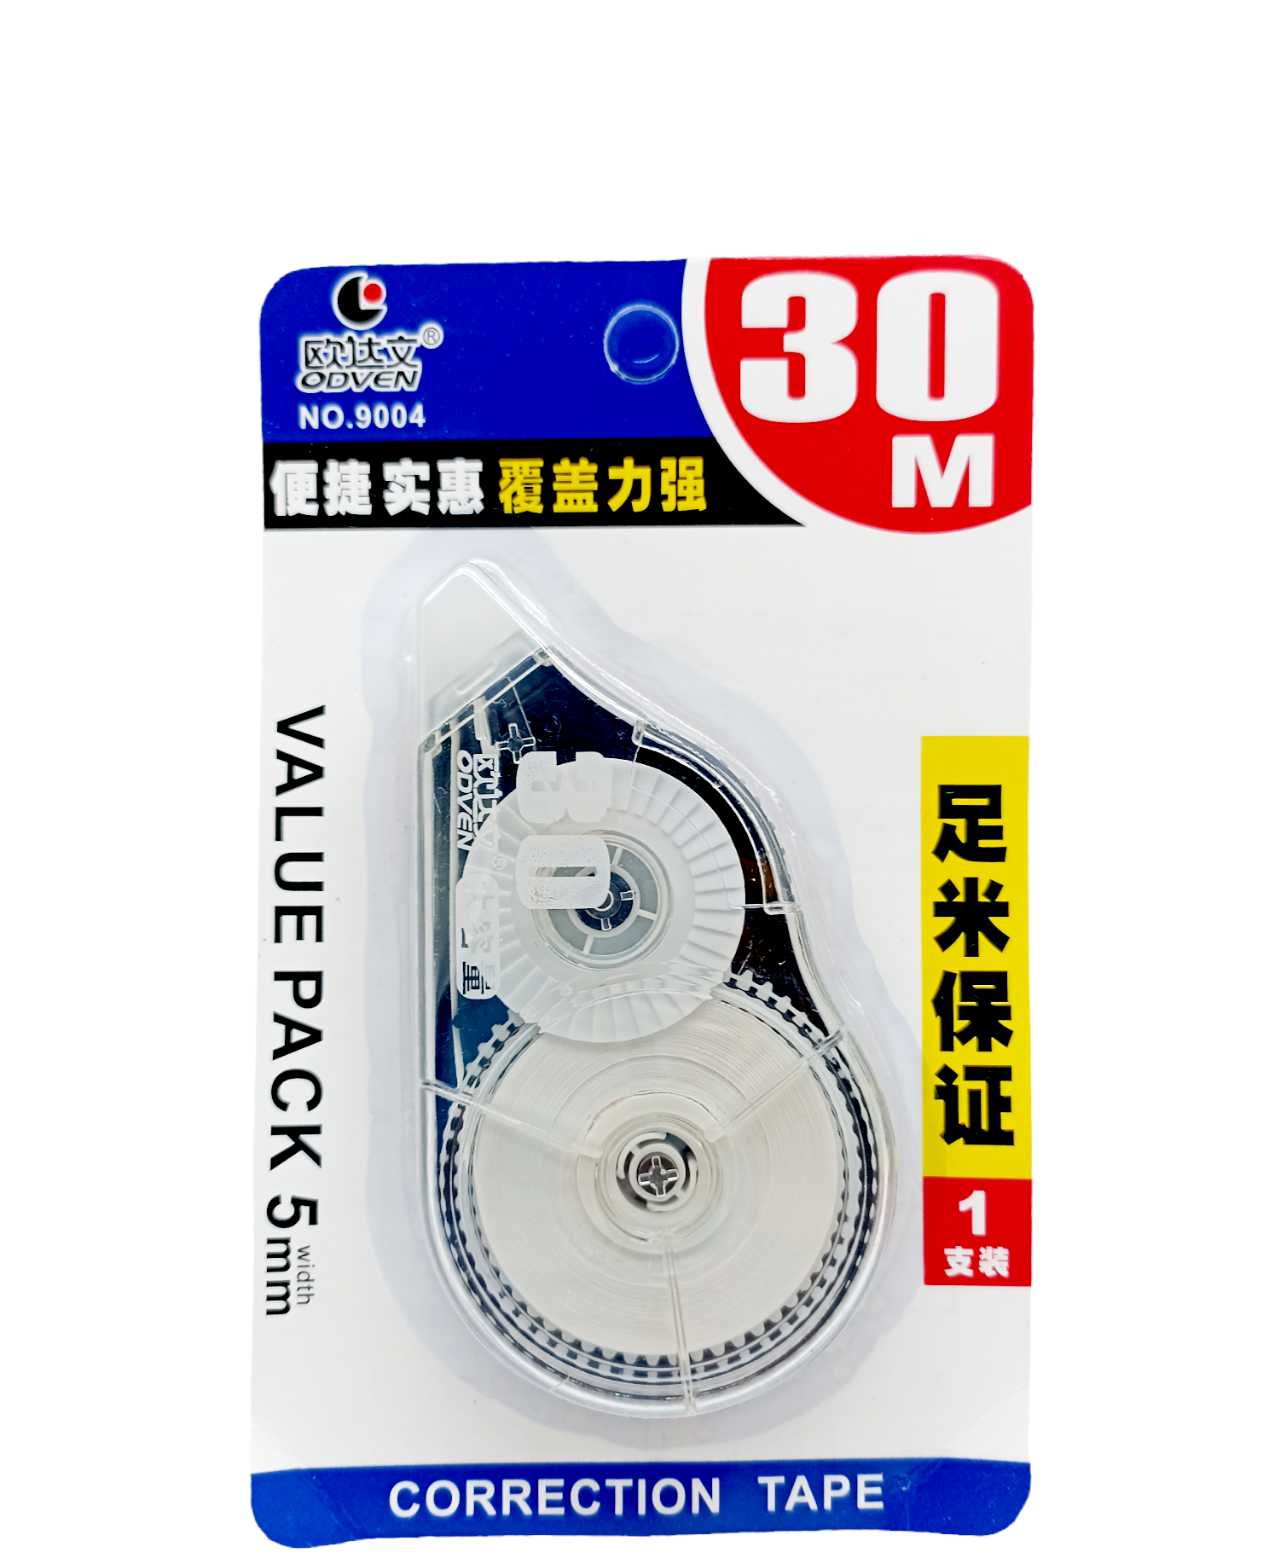 9004 Large Capacity 30 Meters Length Correction tape 1pack